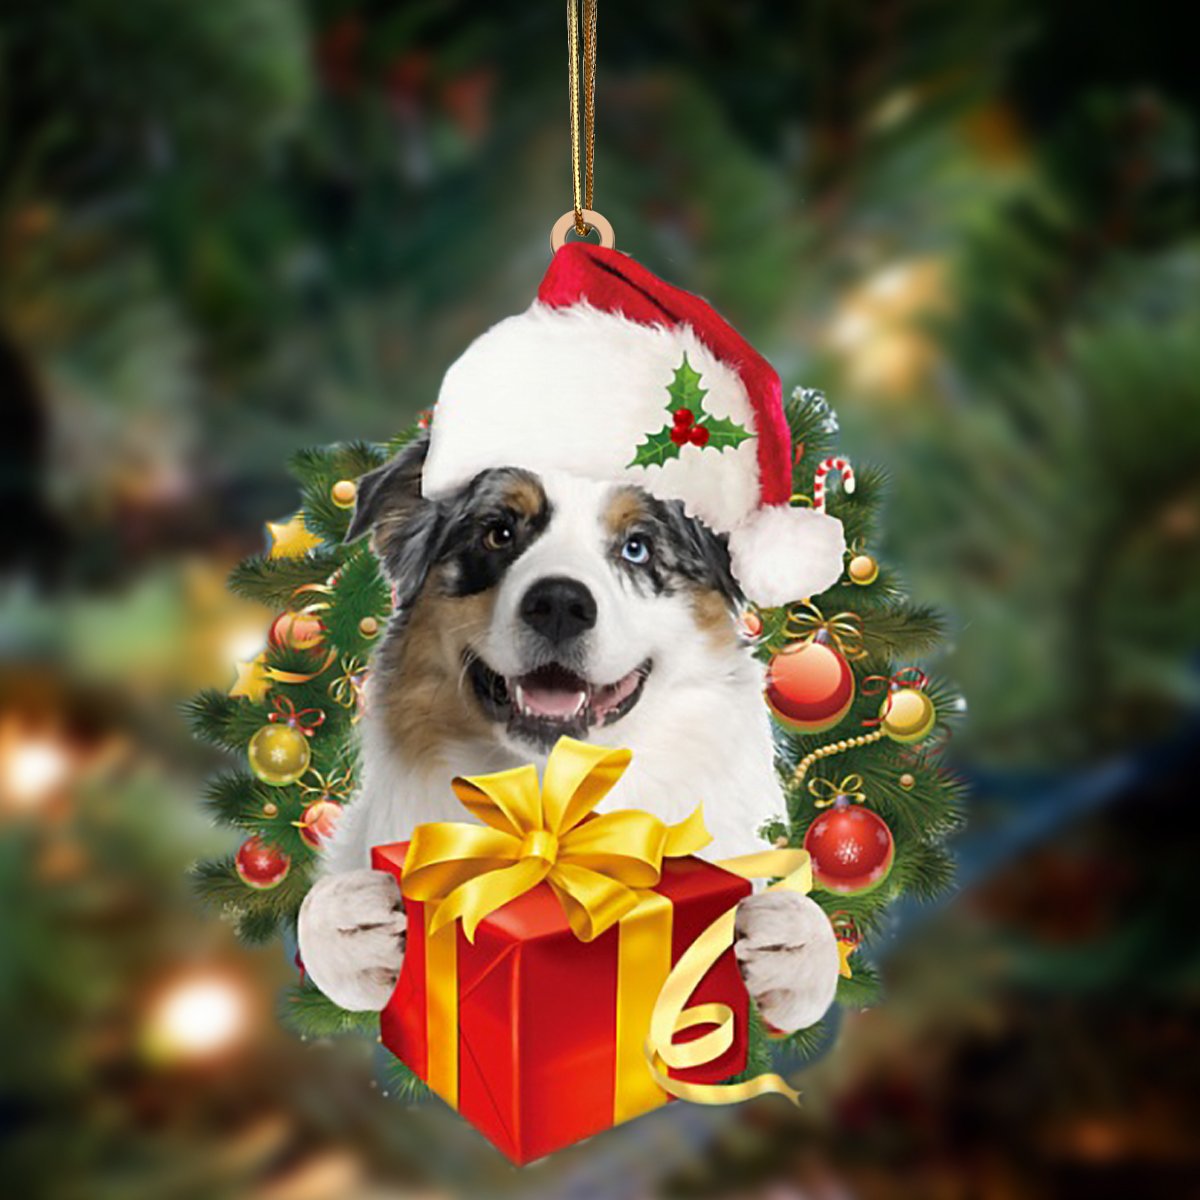 Australian Shepherd Give Gifts Hanging Ornament - Flat Acrylic Dog Ornament – Dog Lovers Gifts For Him Or Her